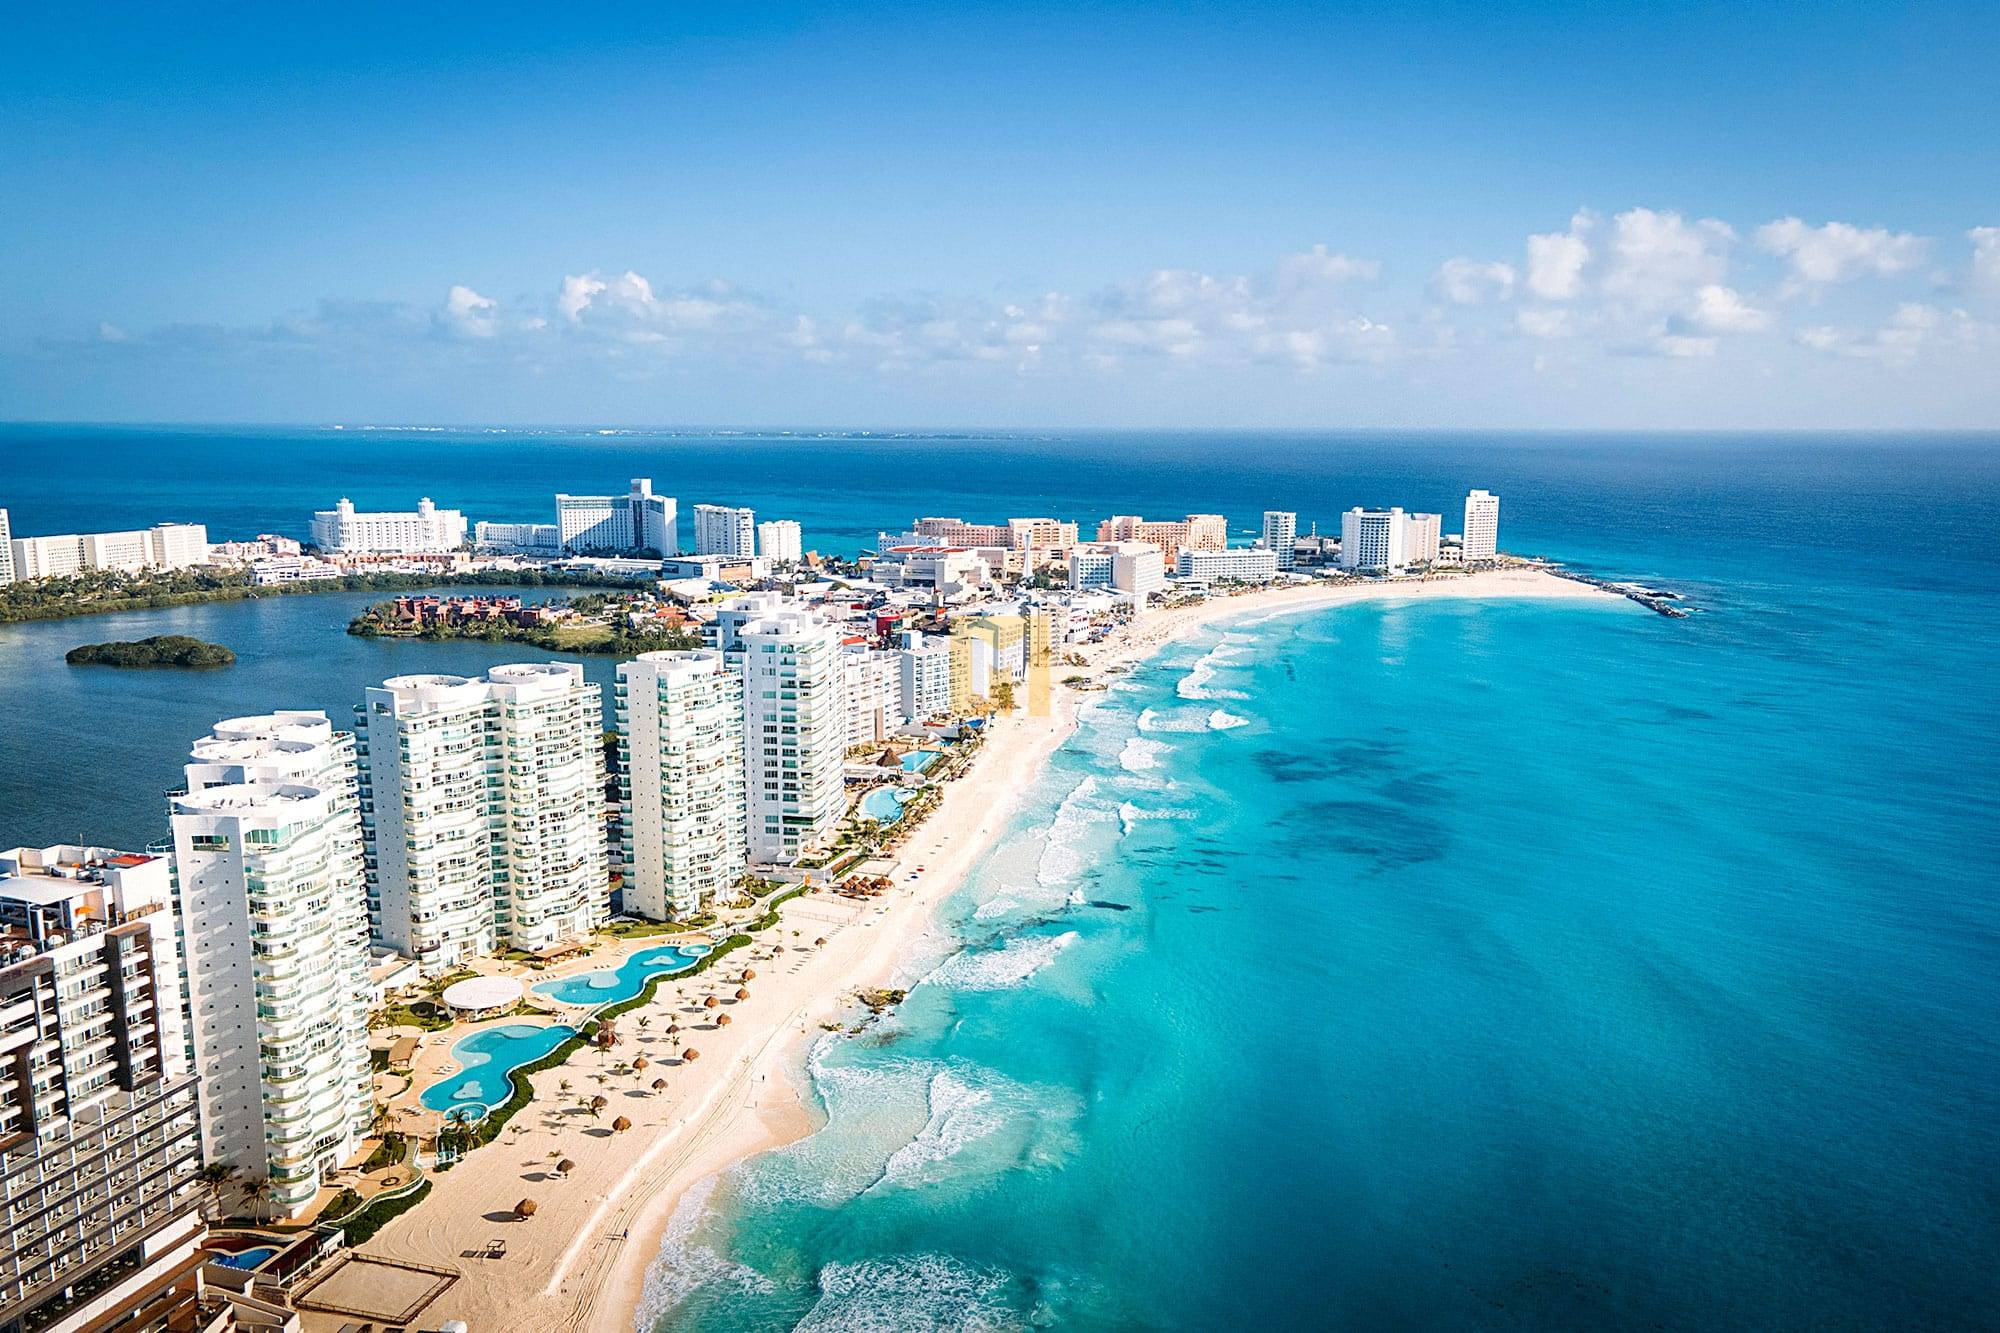 TOP 10 THINGS TO DO ON A TRIP TO CANCUN